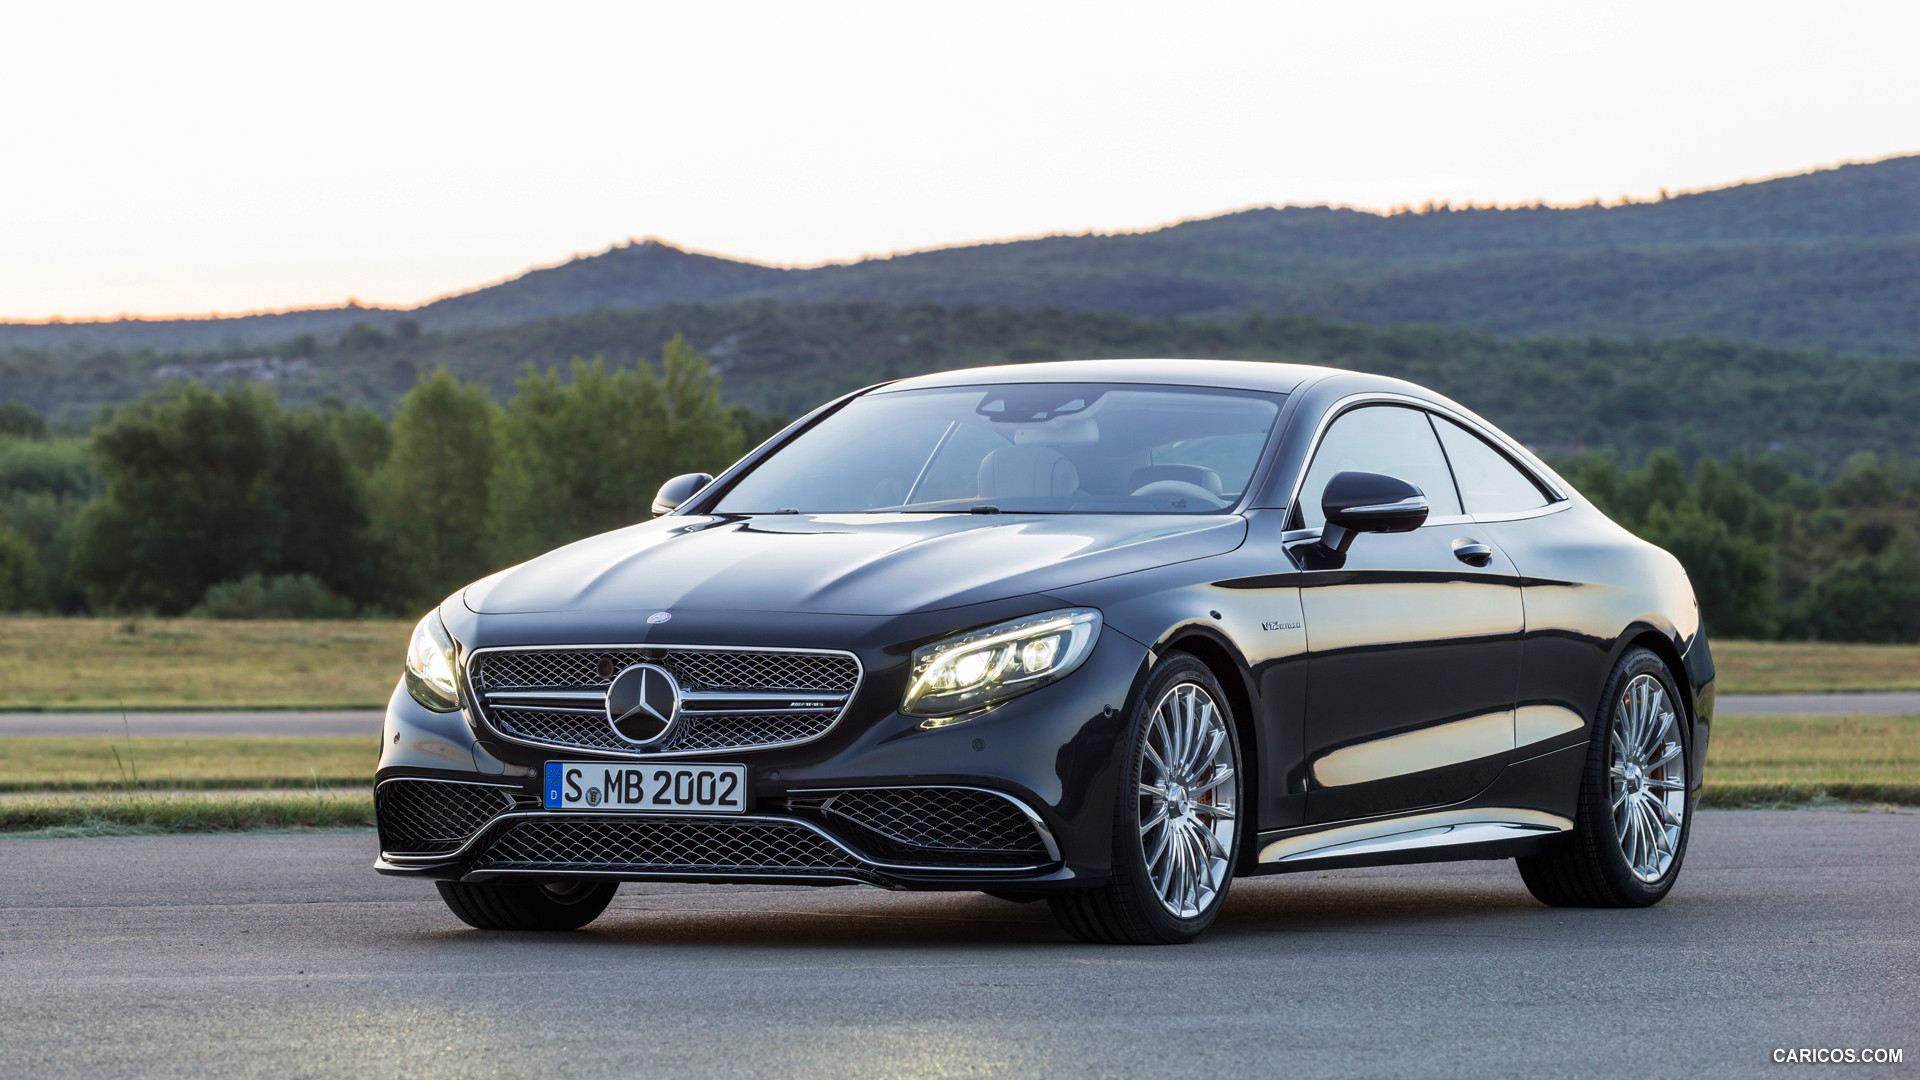 2015 Mercedes-Benz S65 AMG Coupe (Anthracite Blue) - Front, #15 of 101